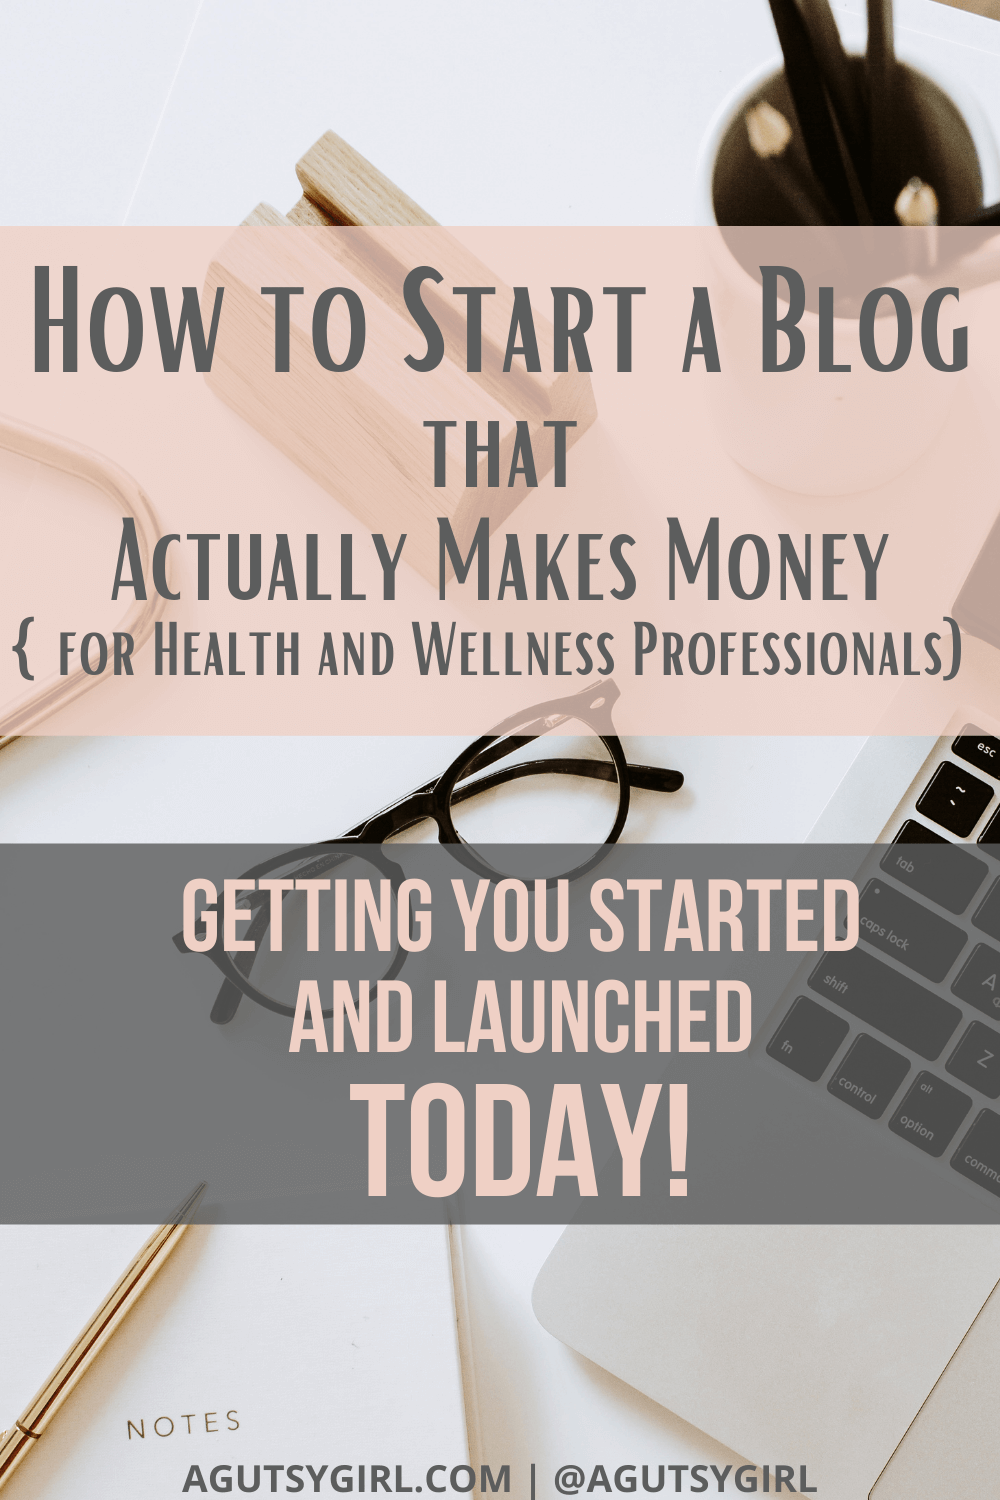 How to Start a Blog that actually makes money health and wellness agutsygirl.com #blogging #howtostartablog #onlinebusiness #IIN